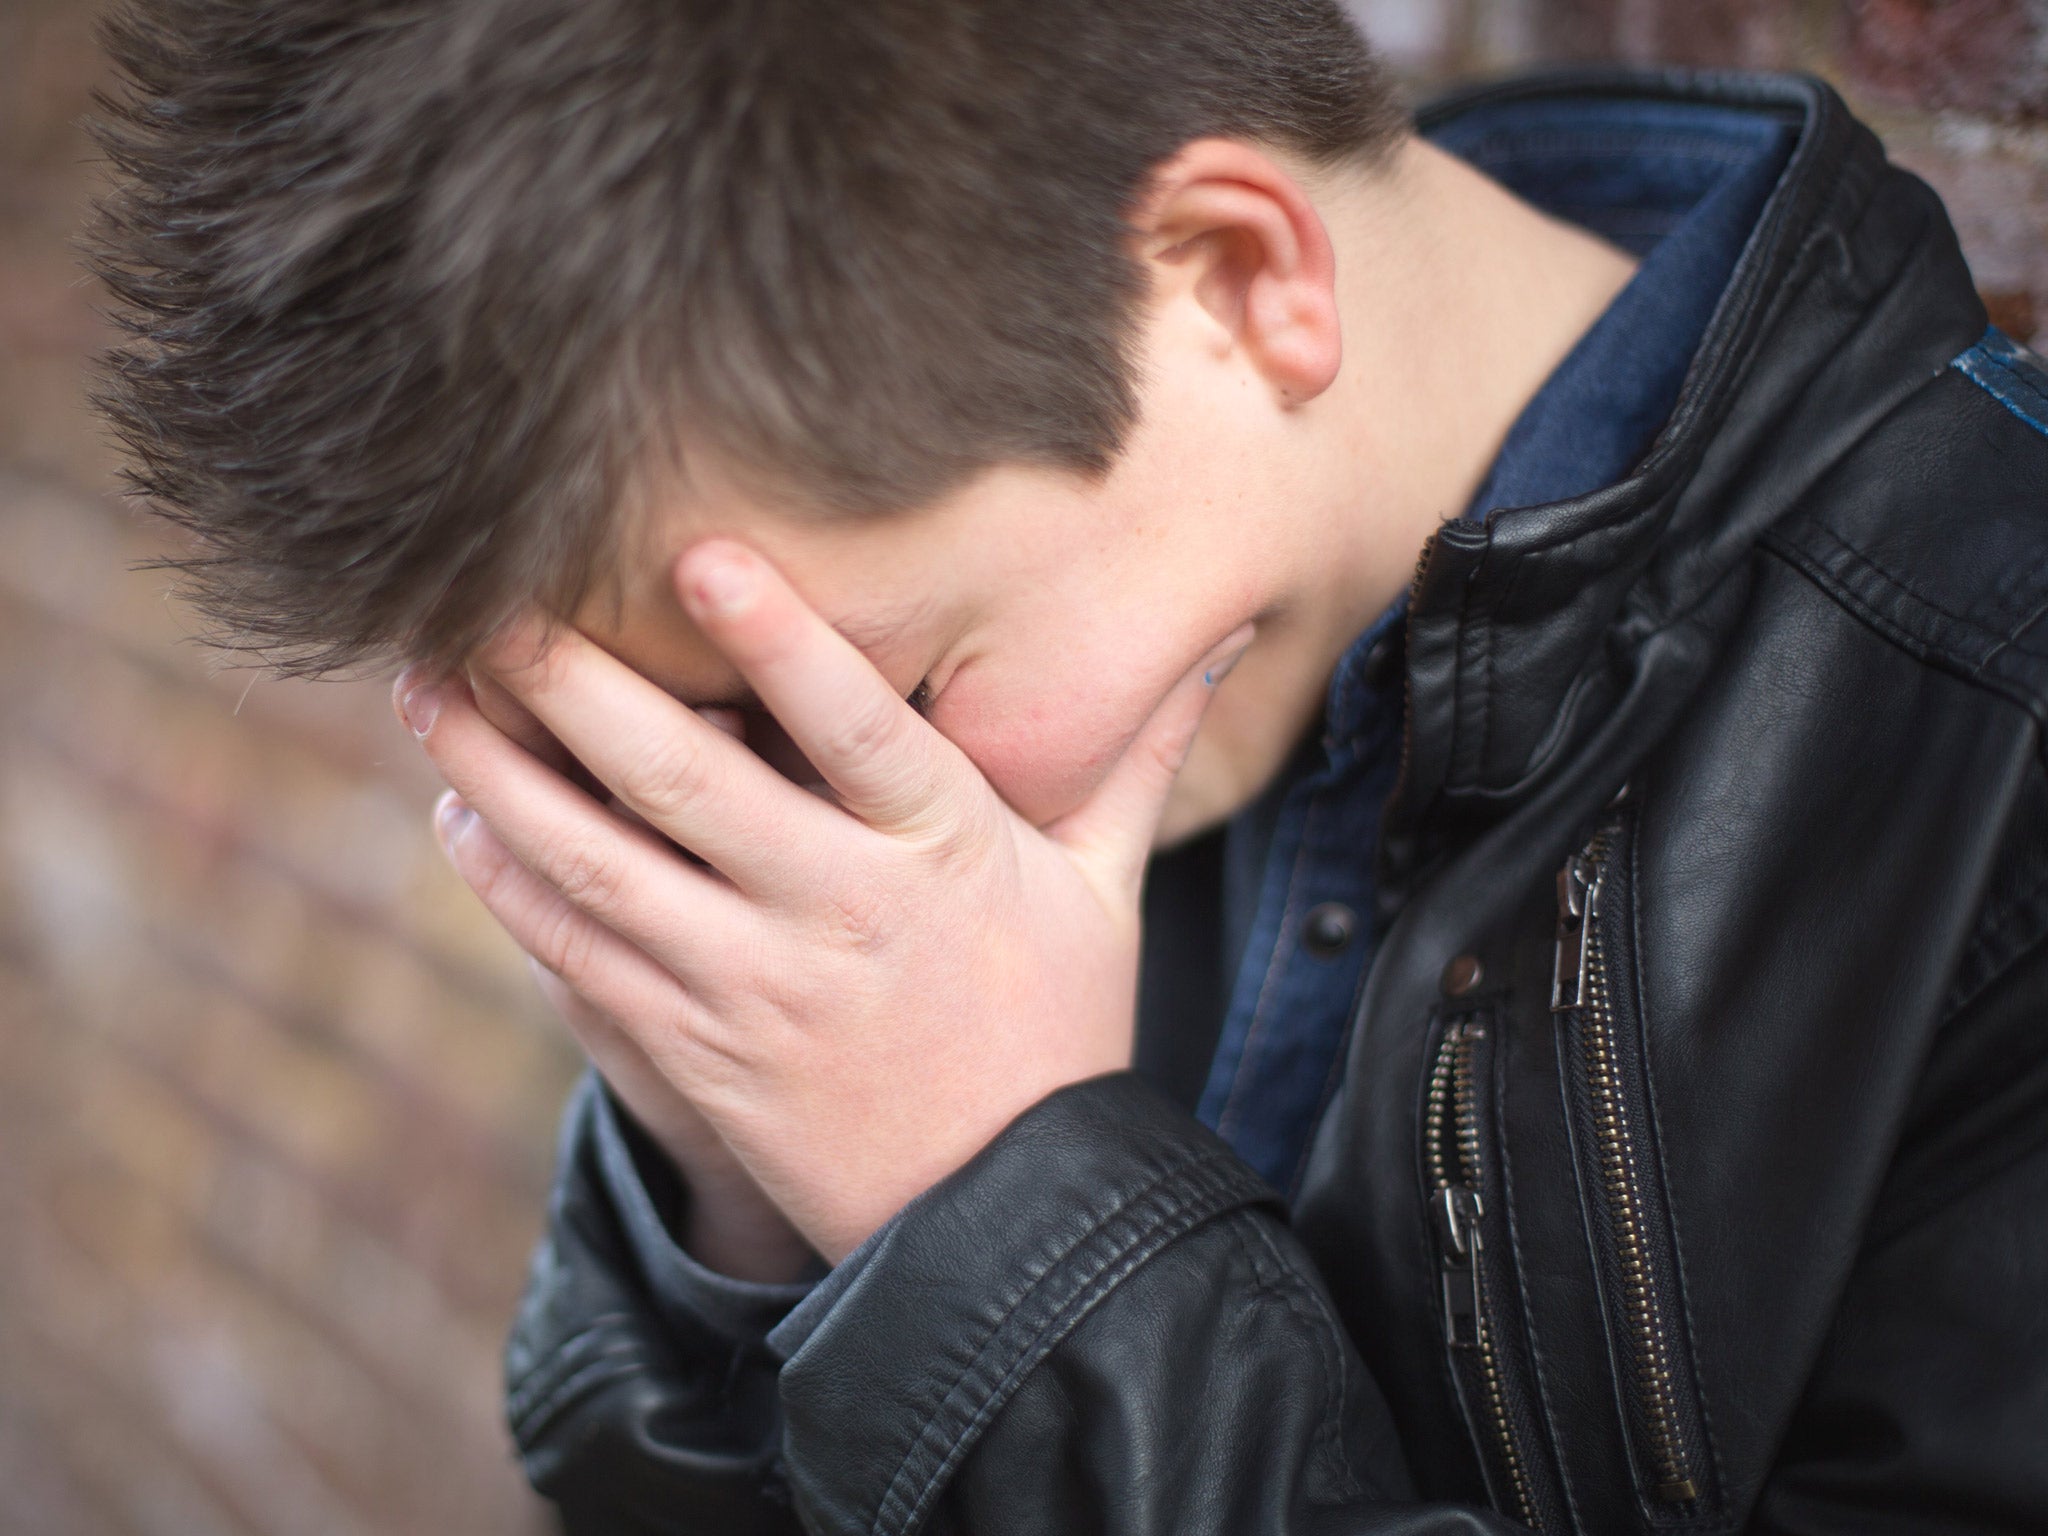 One in three bullying victims said their treatment was as a result of prejudice